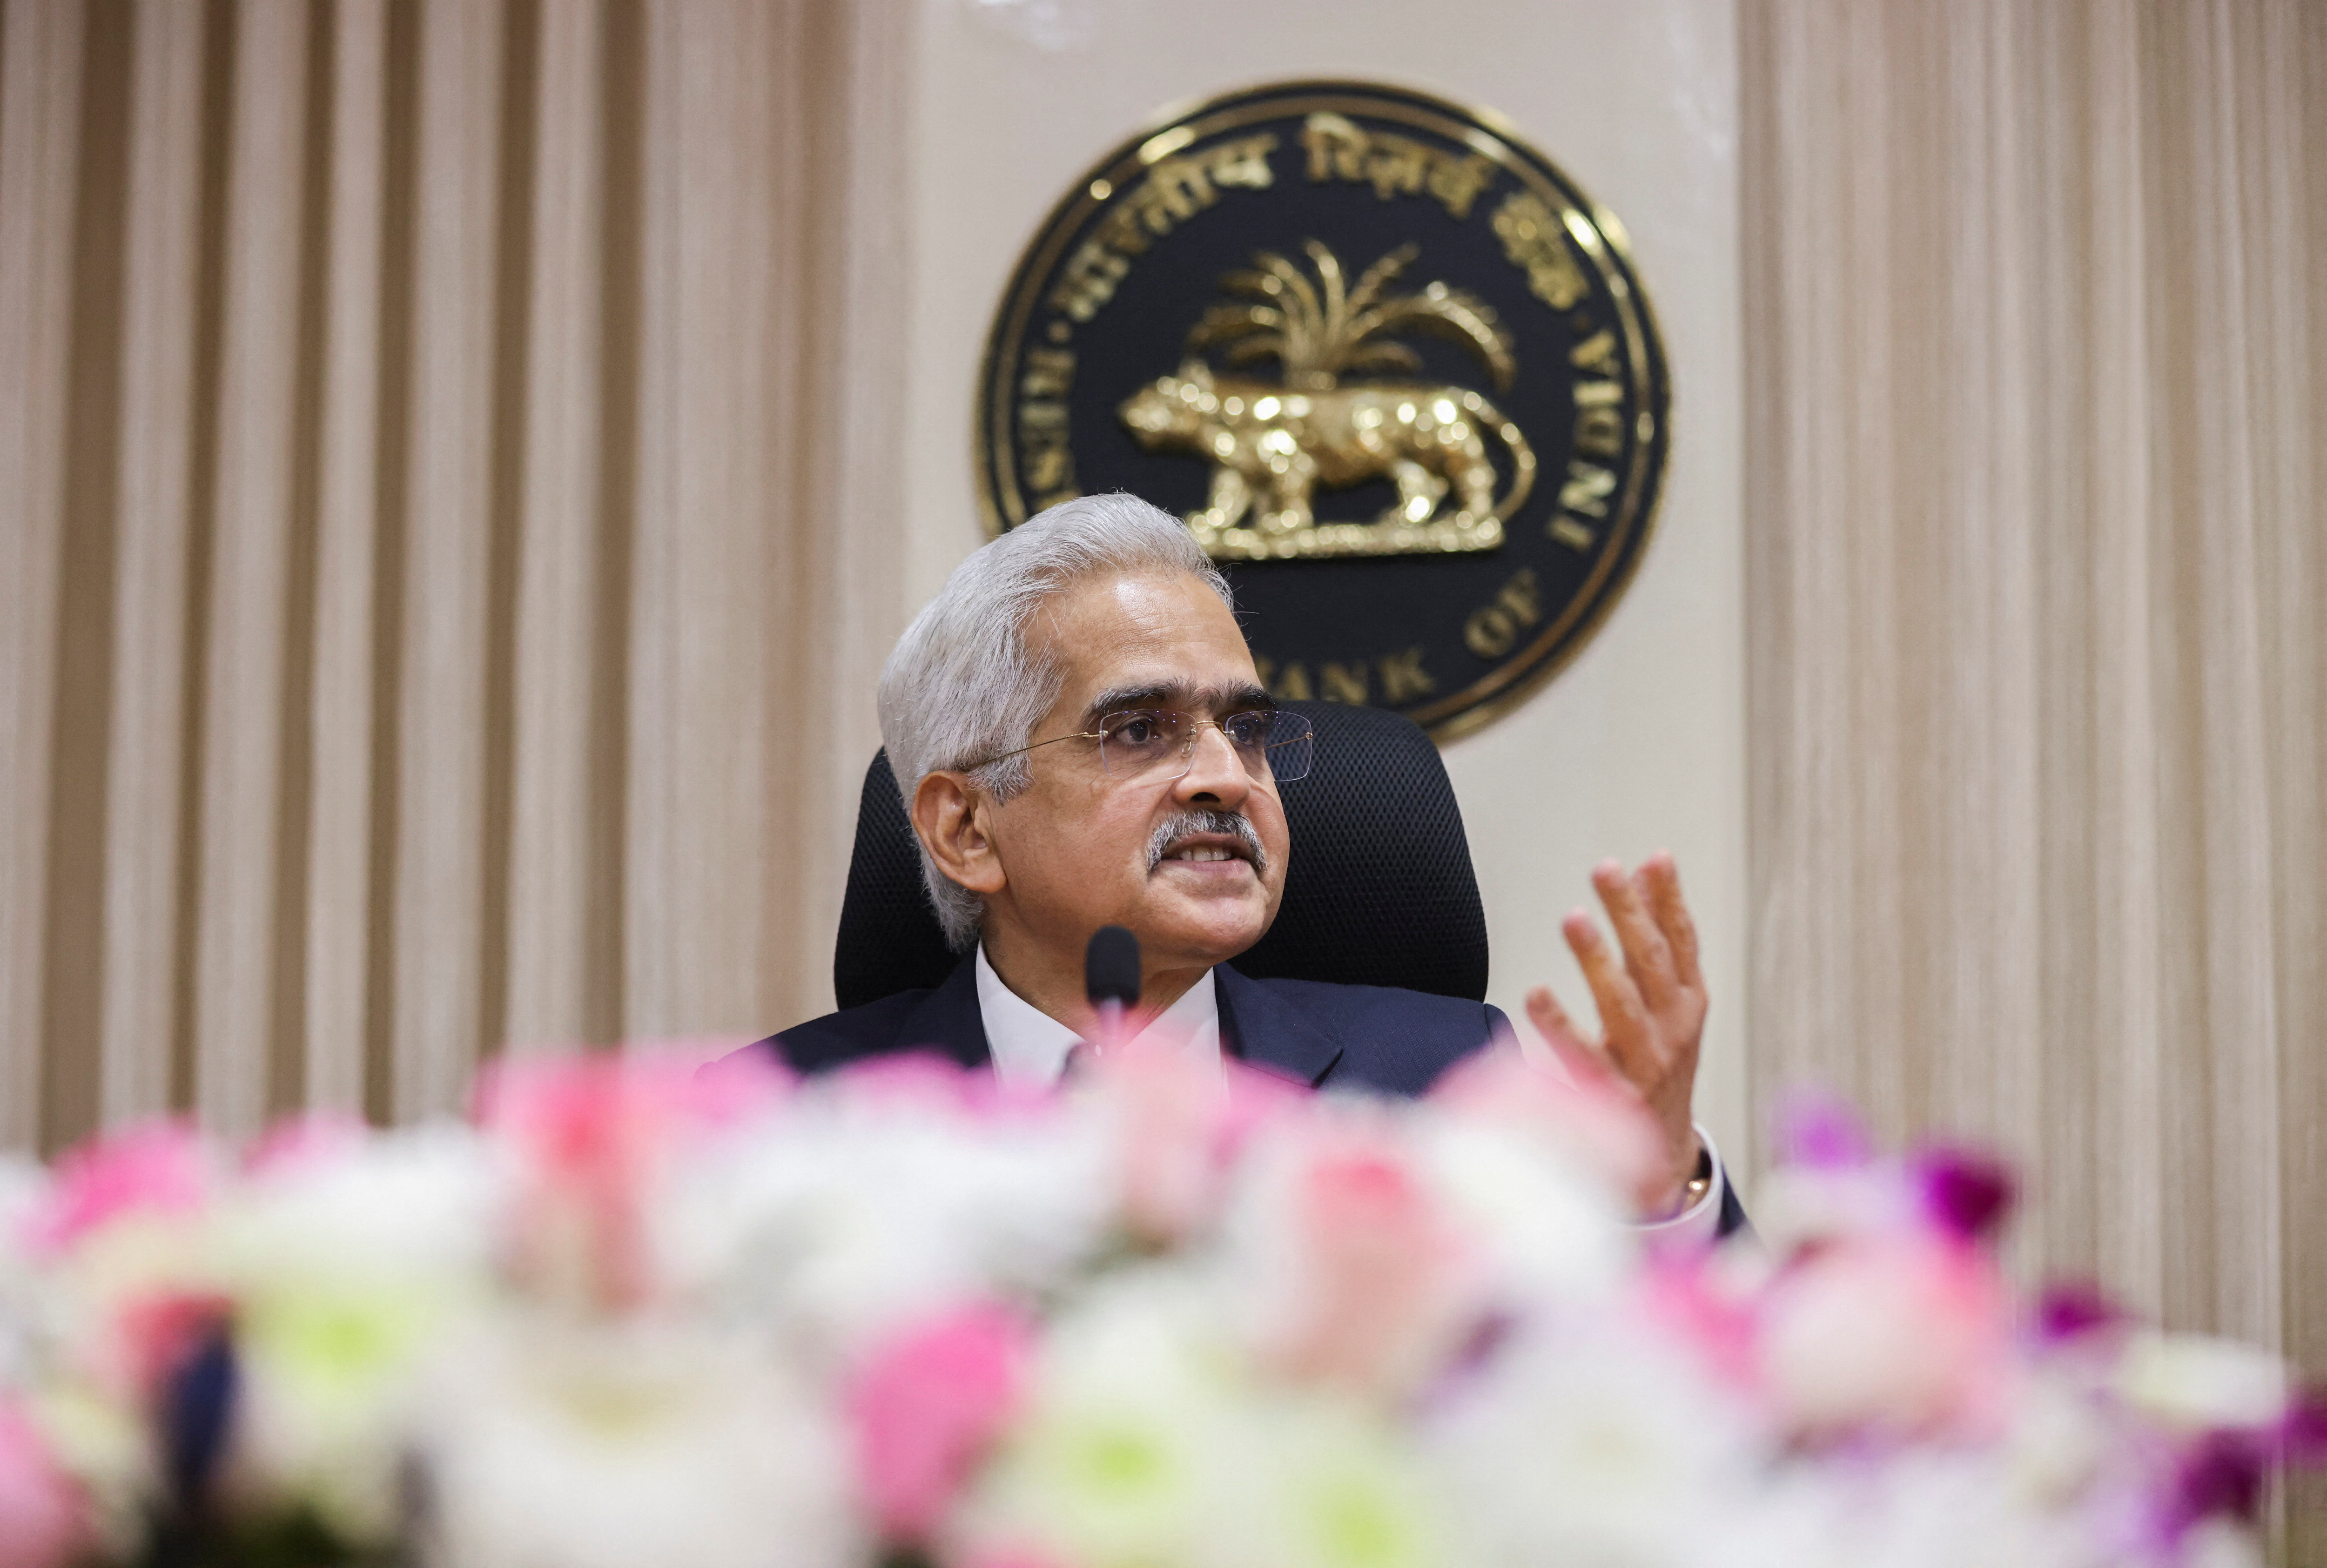 Reserve Bank of India (RBI) Governor Shaktikanta Das attends a news conference after a monetary policy review in Mumbai